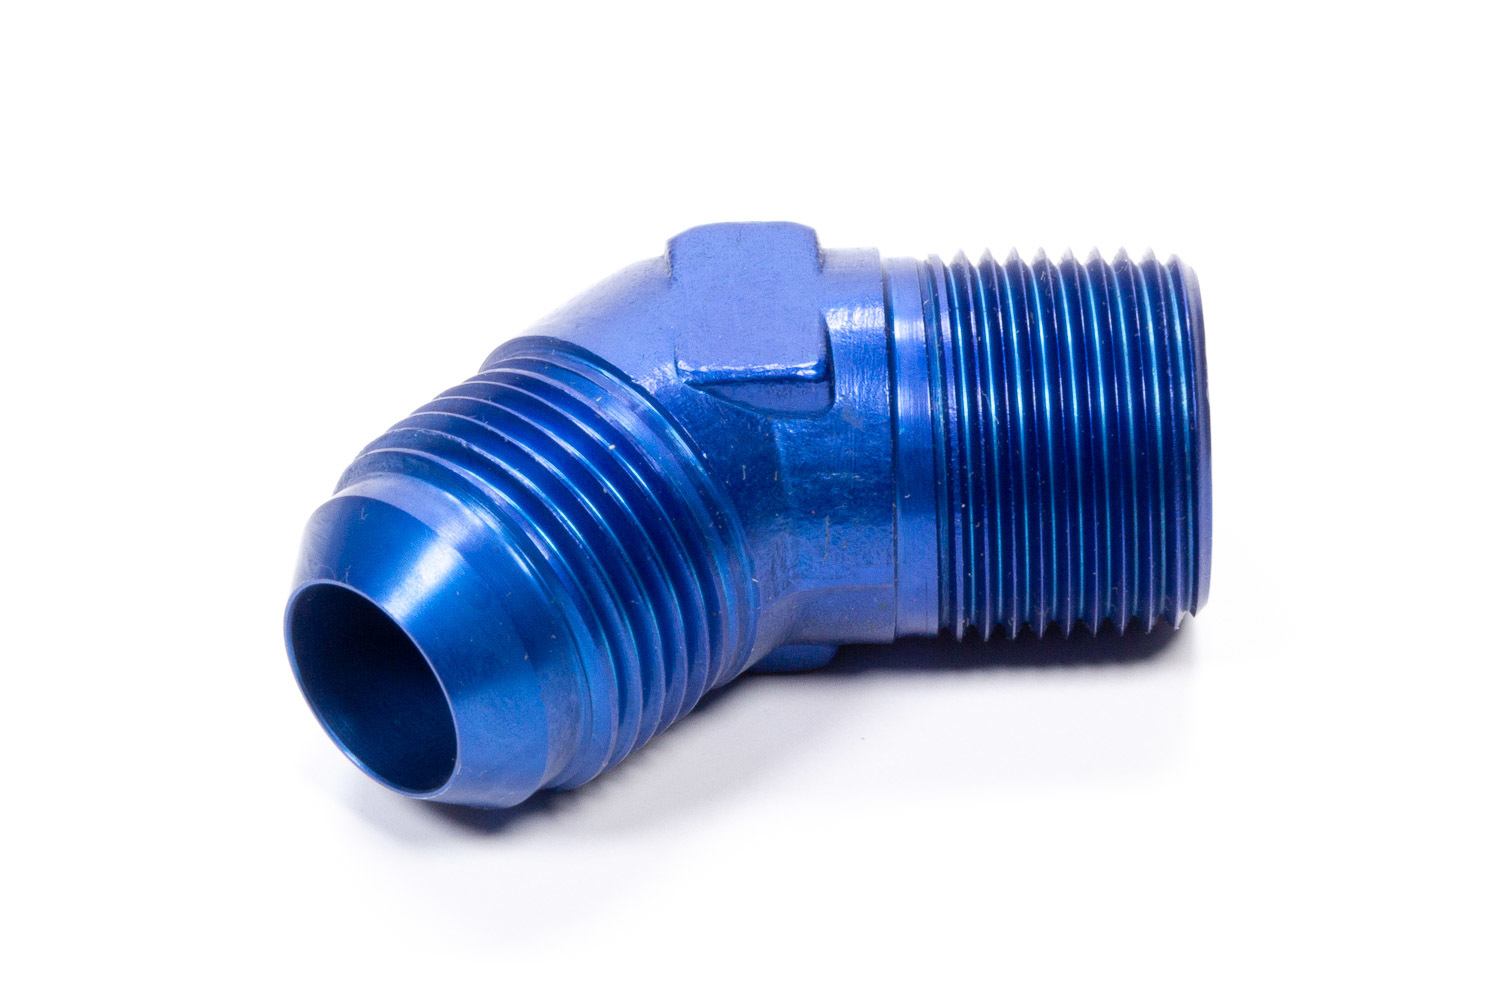 Fragola 482310 Fitting, Adapter, 45 Degree, 10 AN Male to 1/2 in NPT Male, Aluminum, Blue Anodized, Each